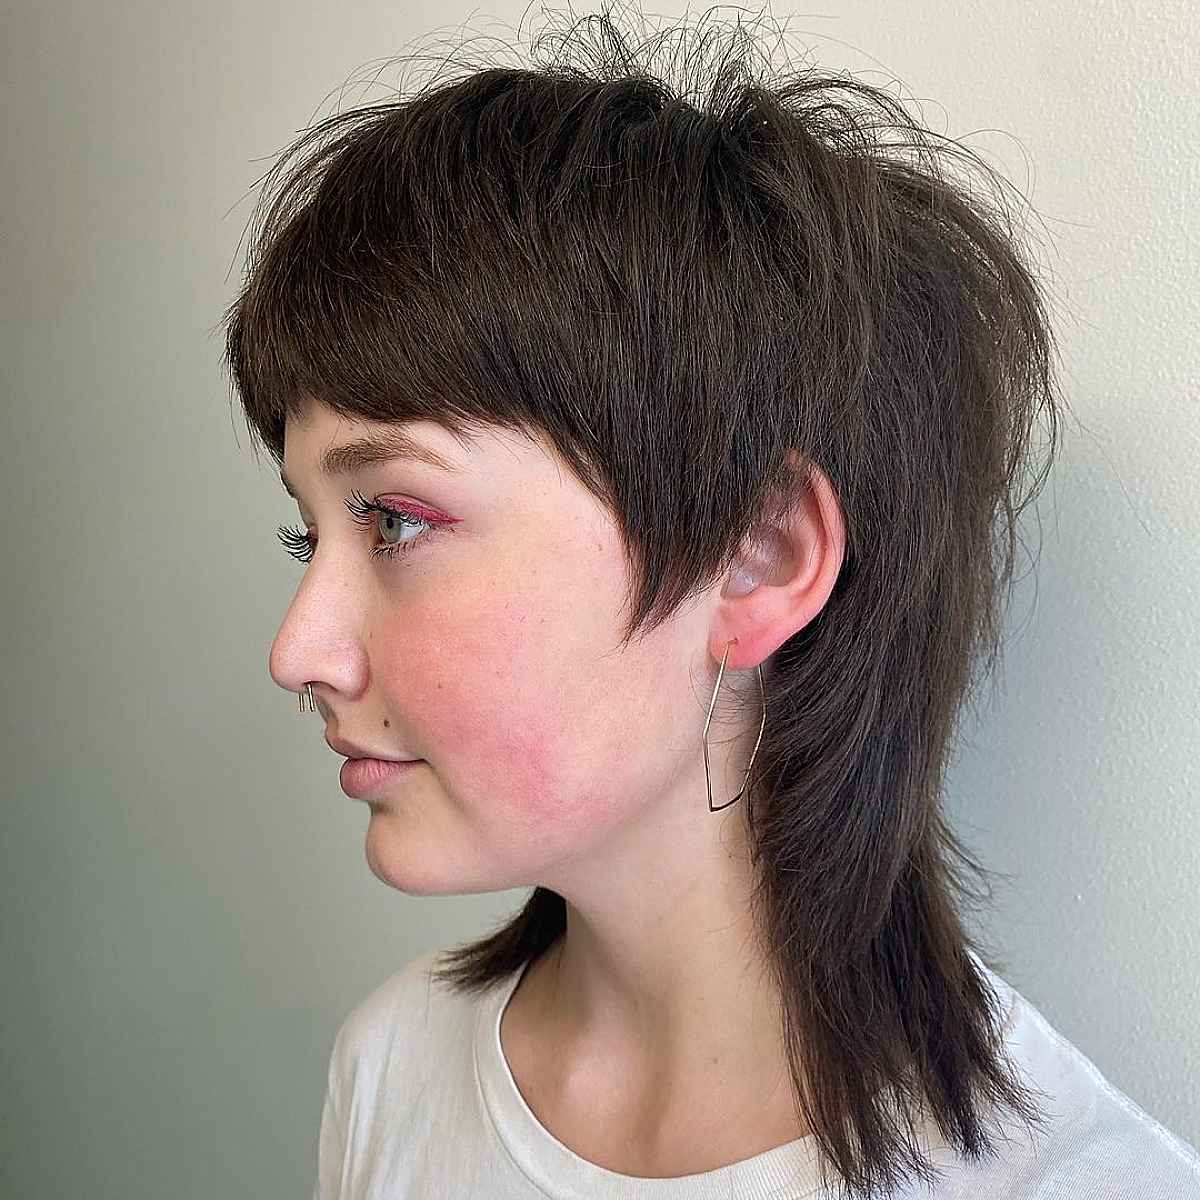 The Shaggy Mullet Is Trending and Here are 26 Awesome Ideas!